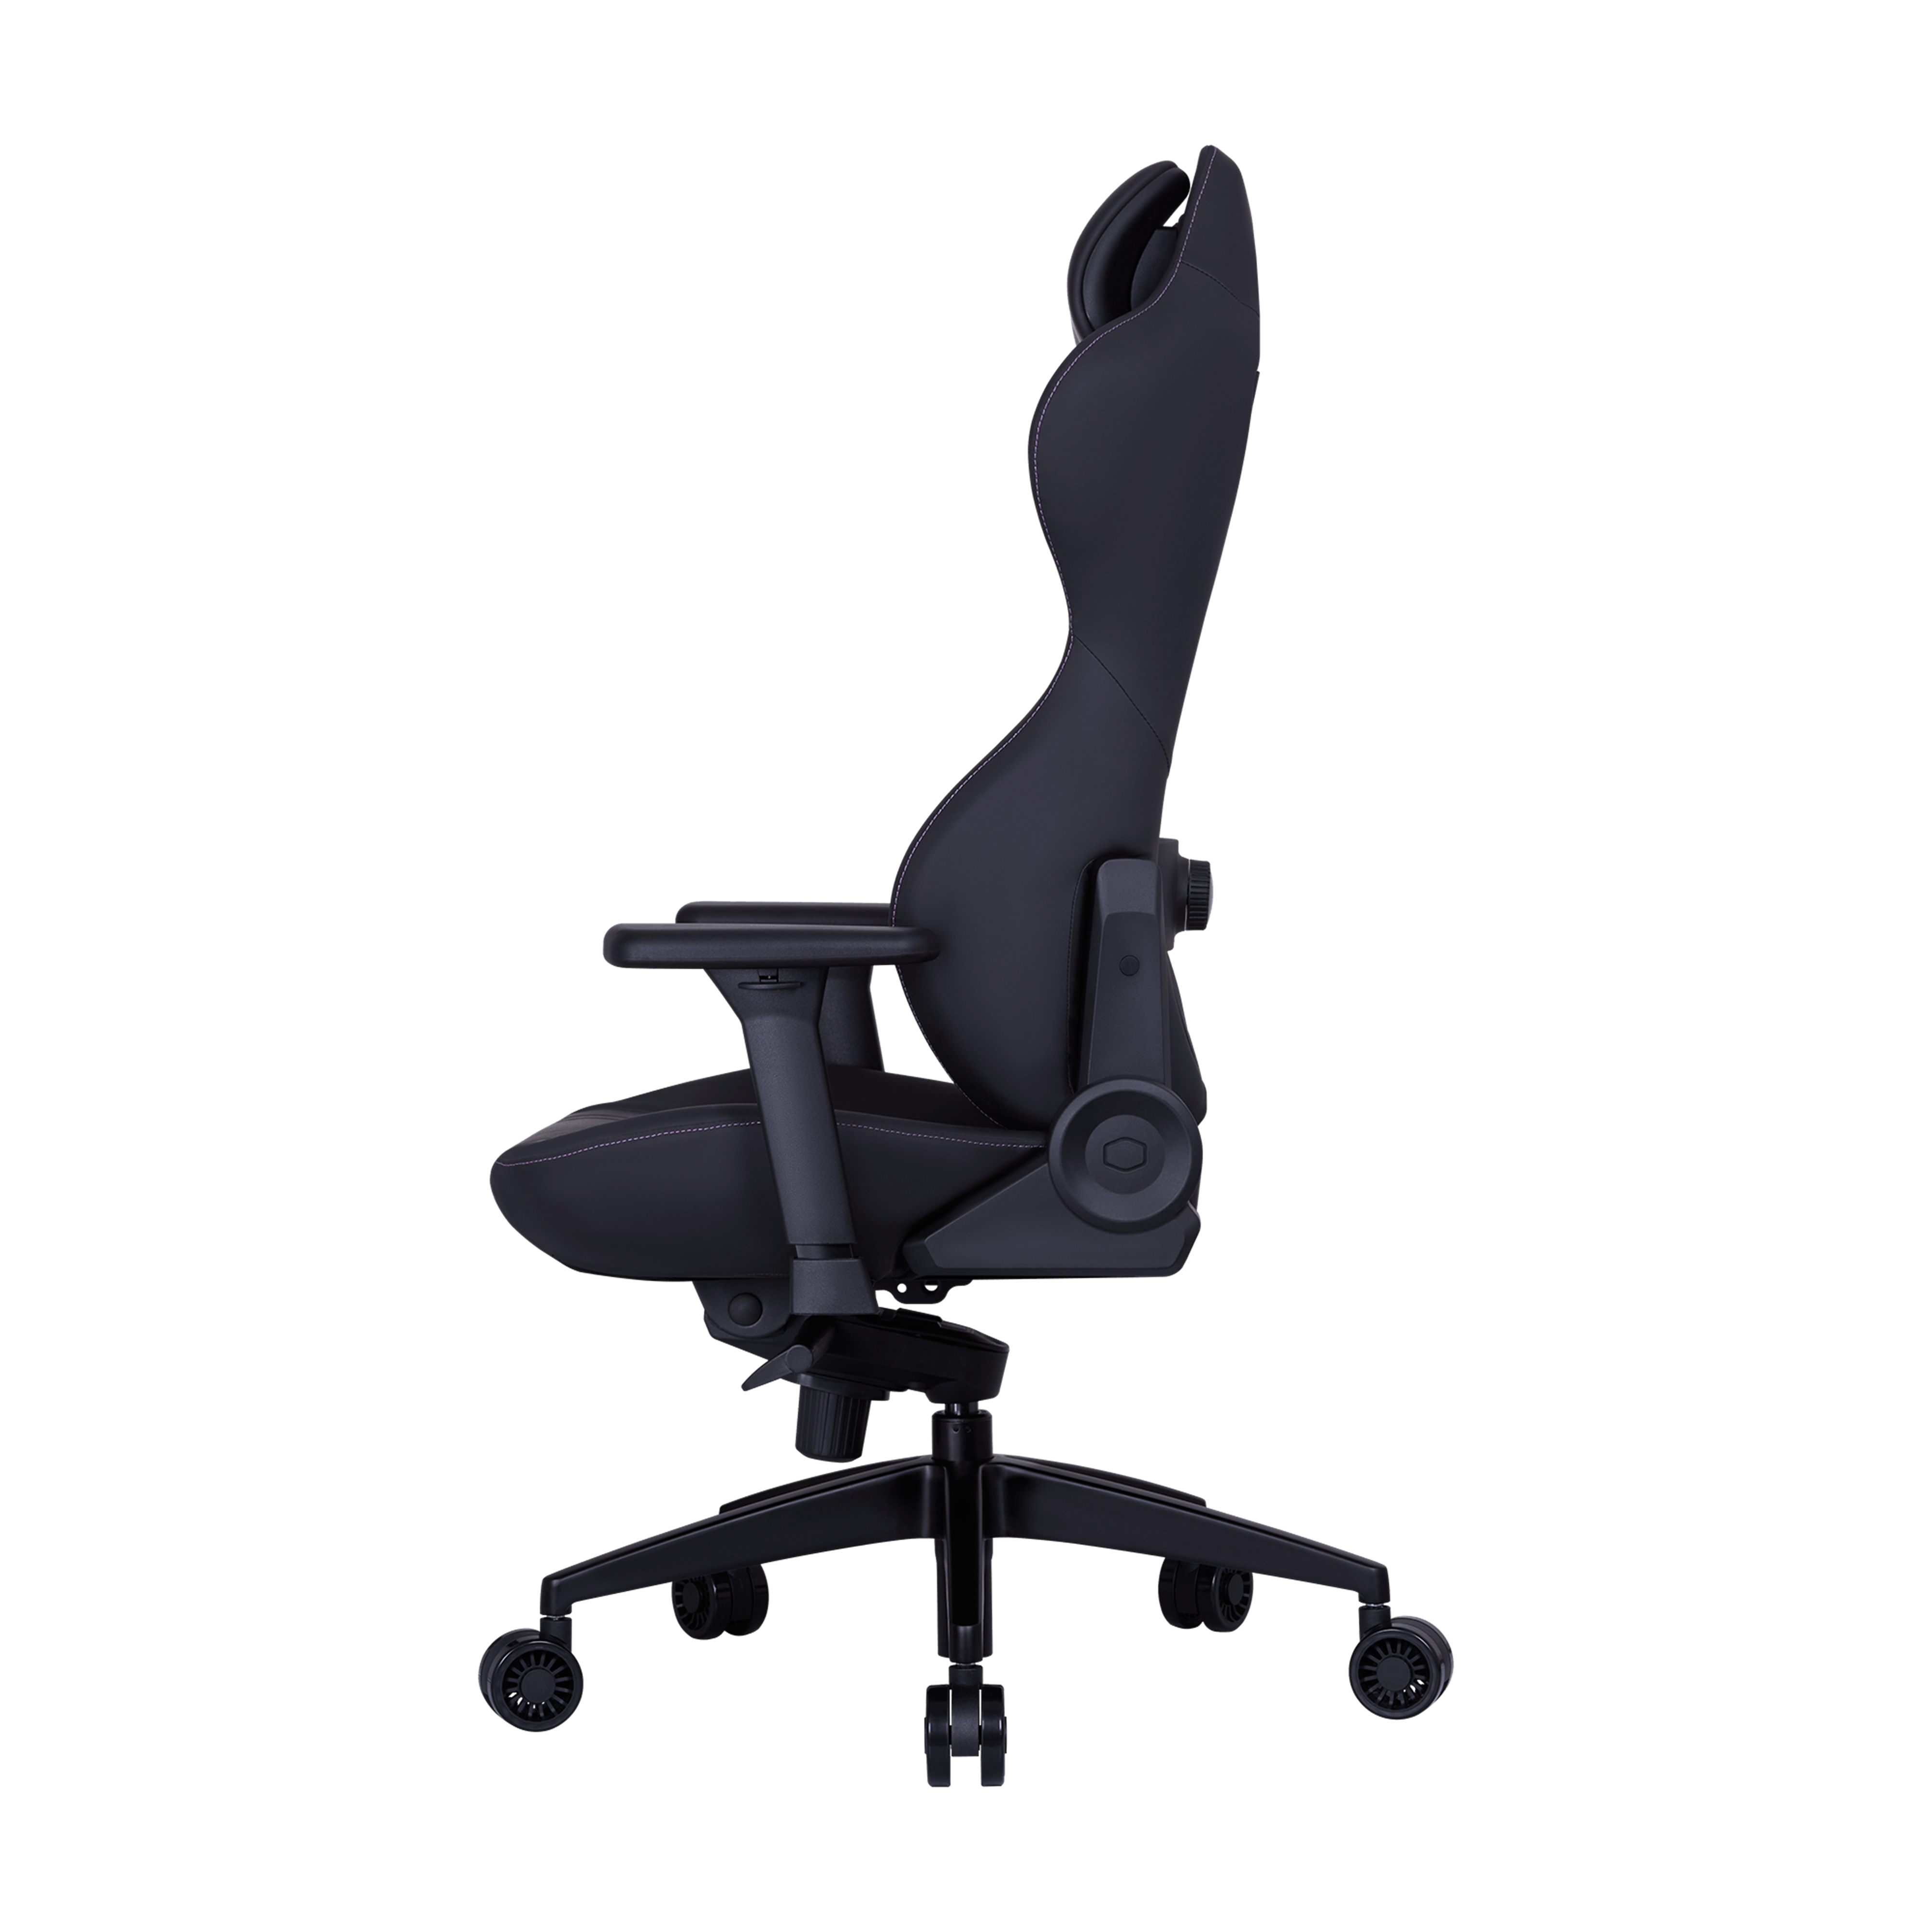 Cooler Master Hybrid 1 Ergo Gaming Chair Review - IGN